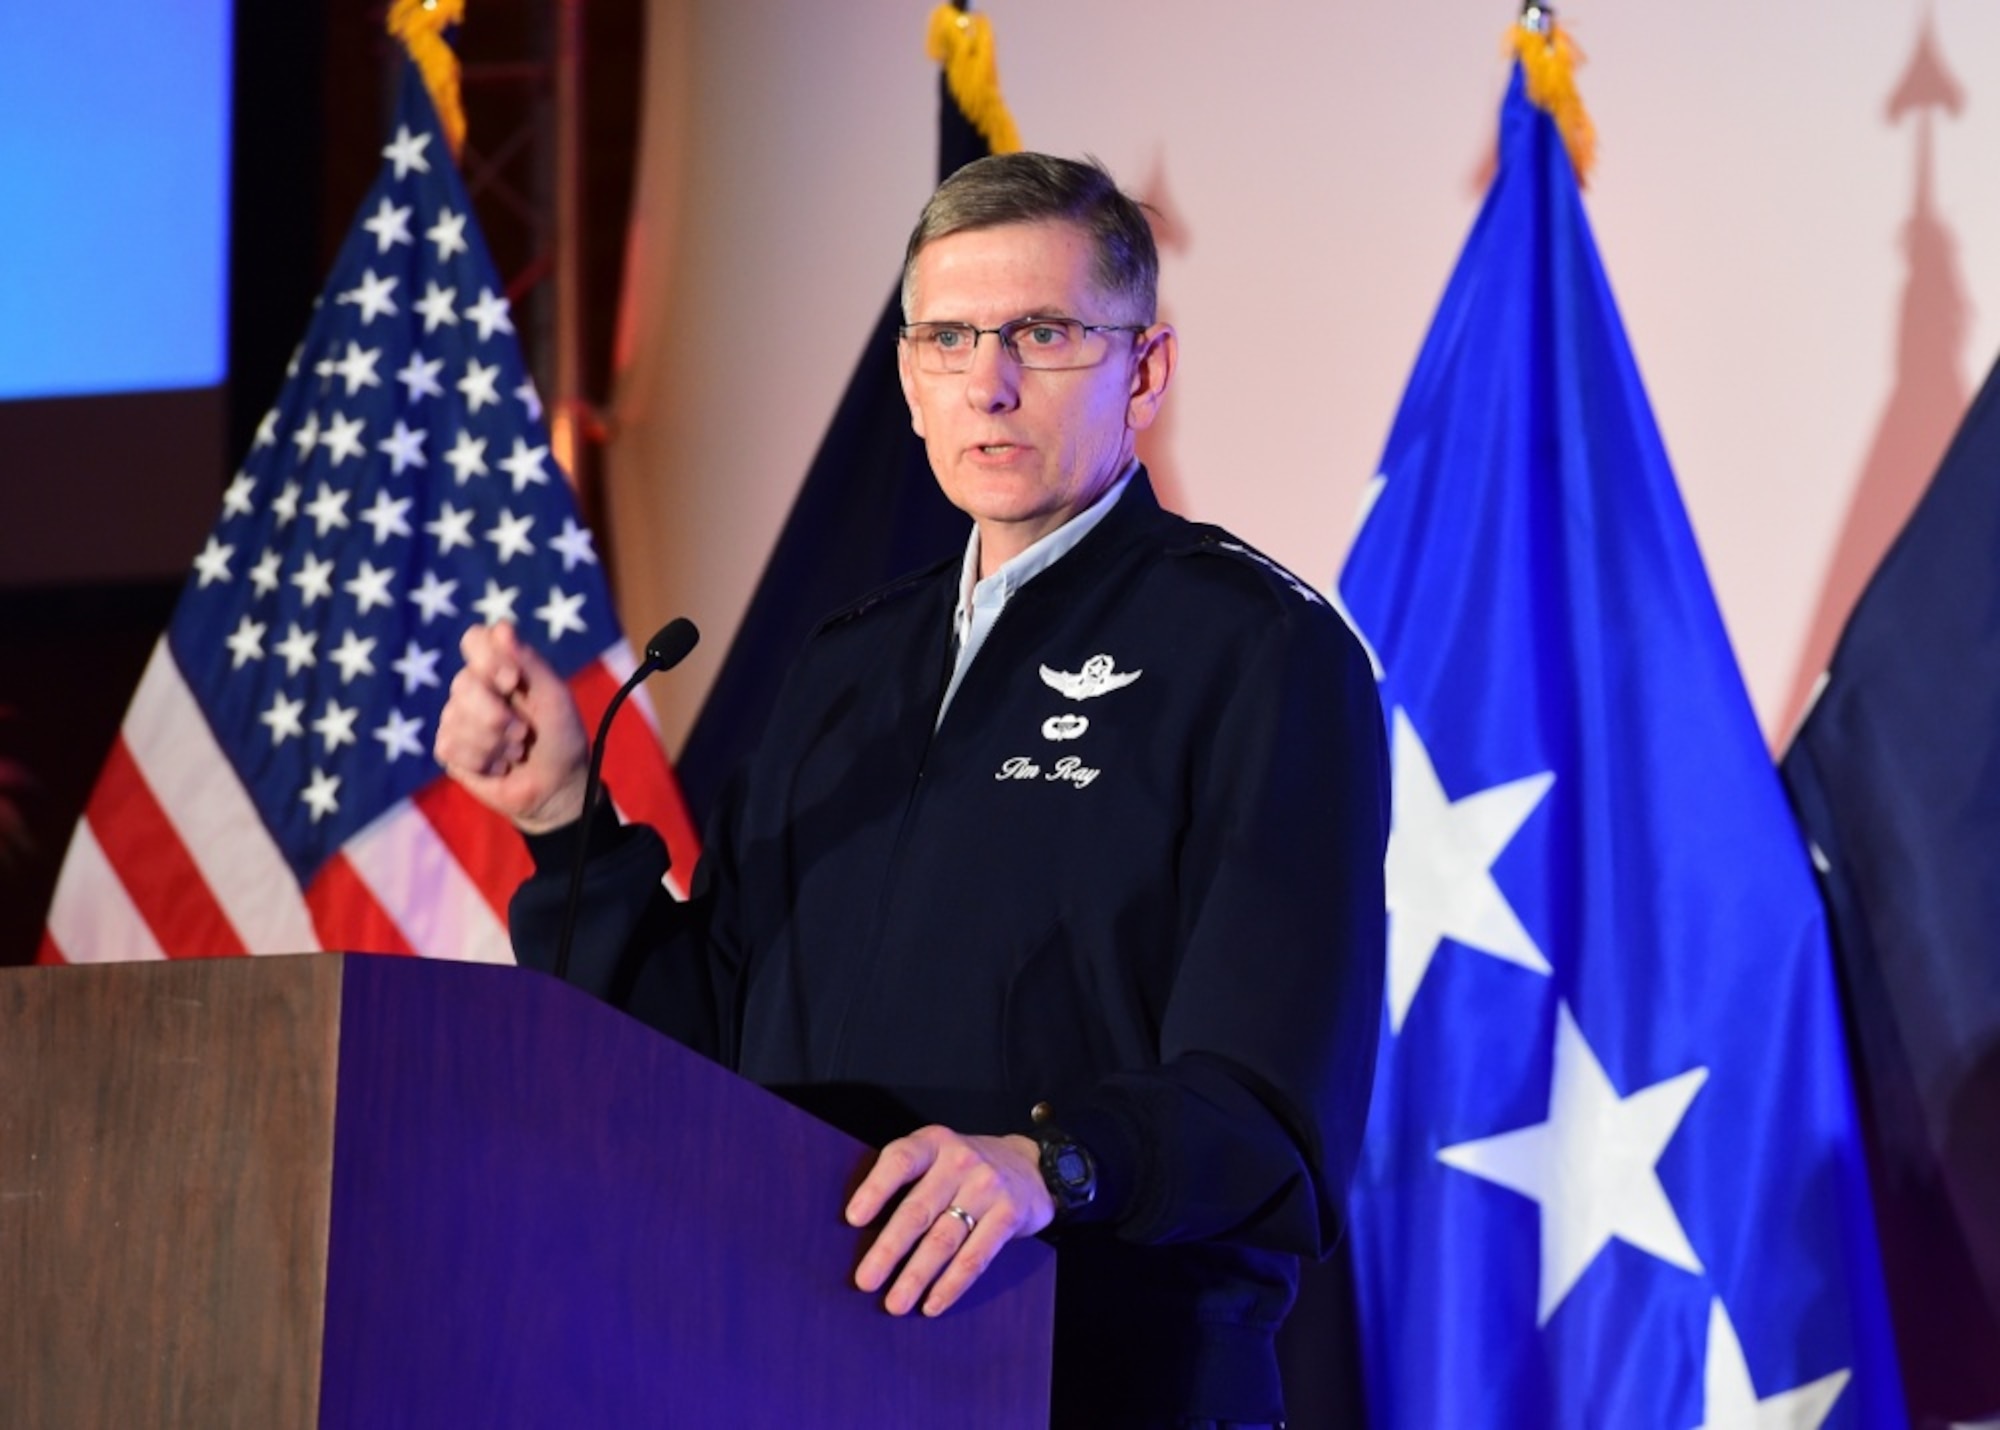 U.S. Air Force Gen. Timothy Ray, commander of Air Force Global Strike Command, provides perspective on deterrence during his keynote address at the 2019 United States Strategic Command Deterrence Symposium at La Vista Conference Center in La Vista, Neb., July 31, 2019. This annual symposium draws academic, government, military and international experts with the goal of creating a forum to explore a broad range of deterrence issues and thinking. (U.S. Navy photo by Mass Communication Specialist 1st Class Julie R. Matyascik)